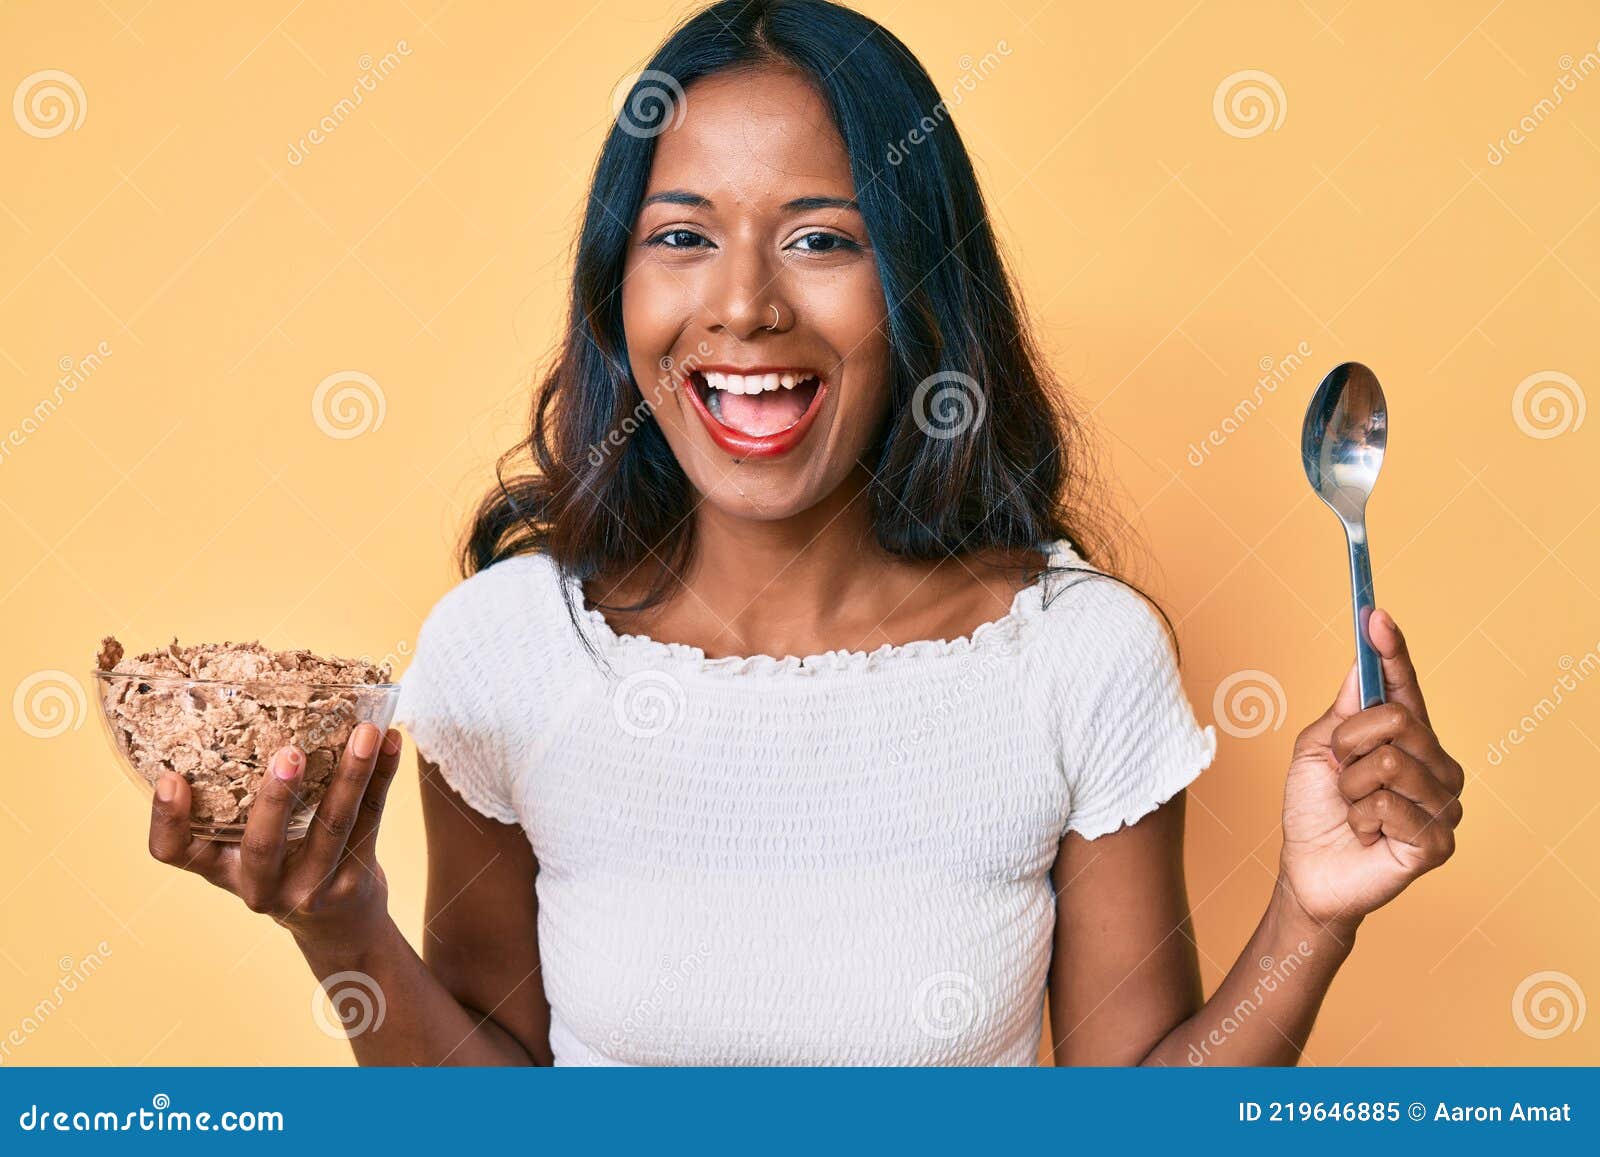 Young Indian Girl Eating Healthy Whole Grain Celears Smiling and Laughing  Hard Out Loud because Funny Crazy Joke Stock Image - Image of friendly,  expression: 219646885